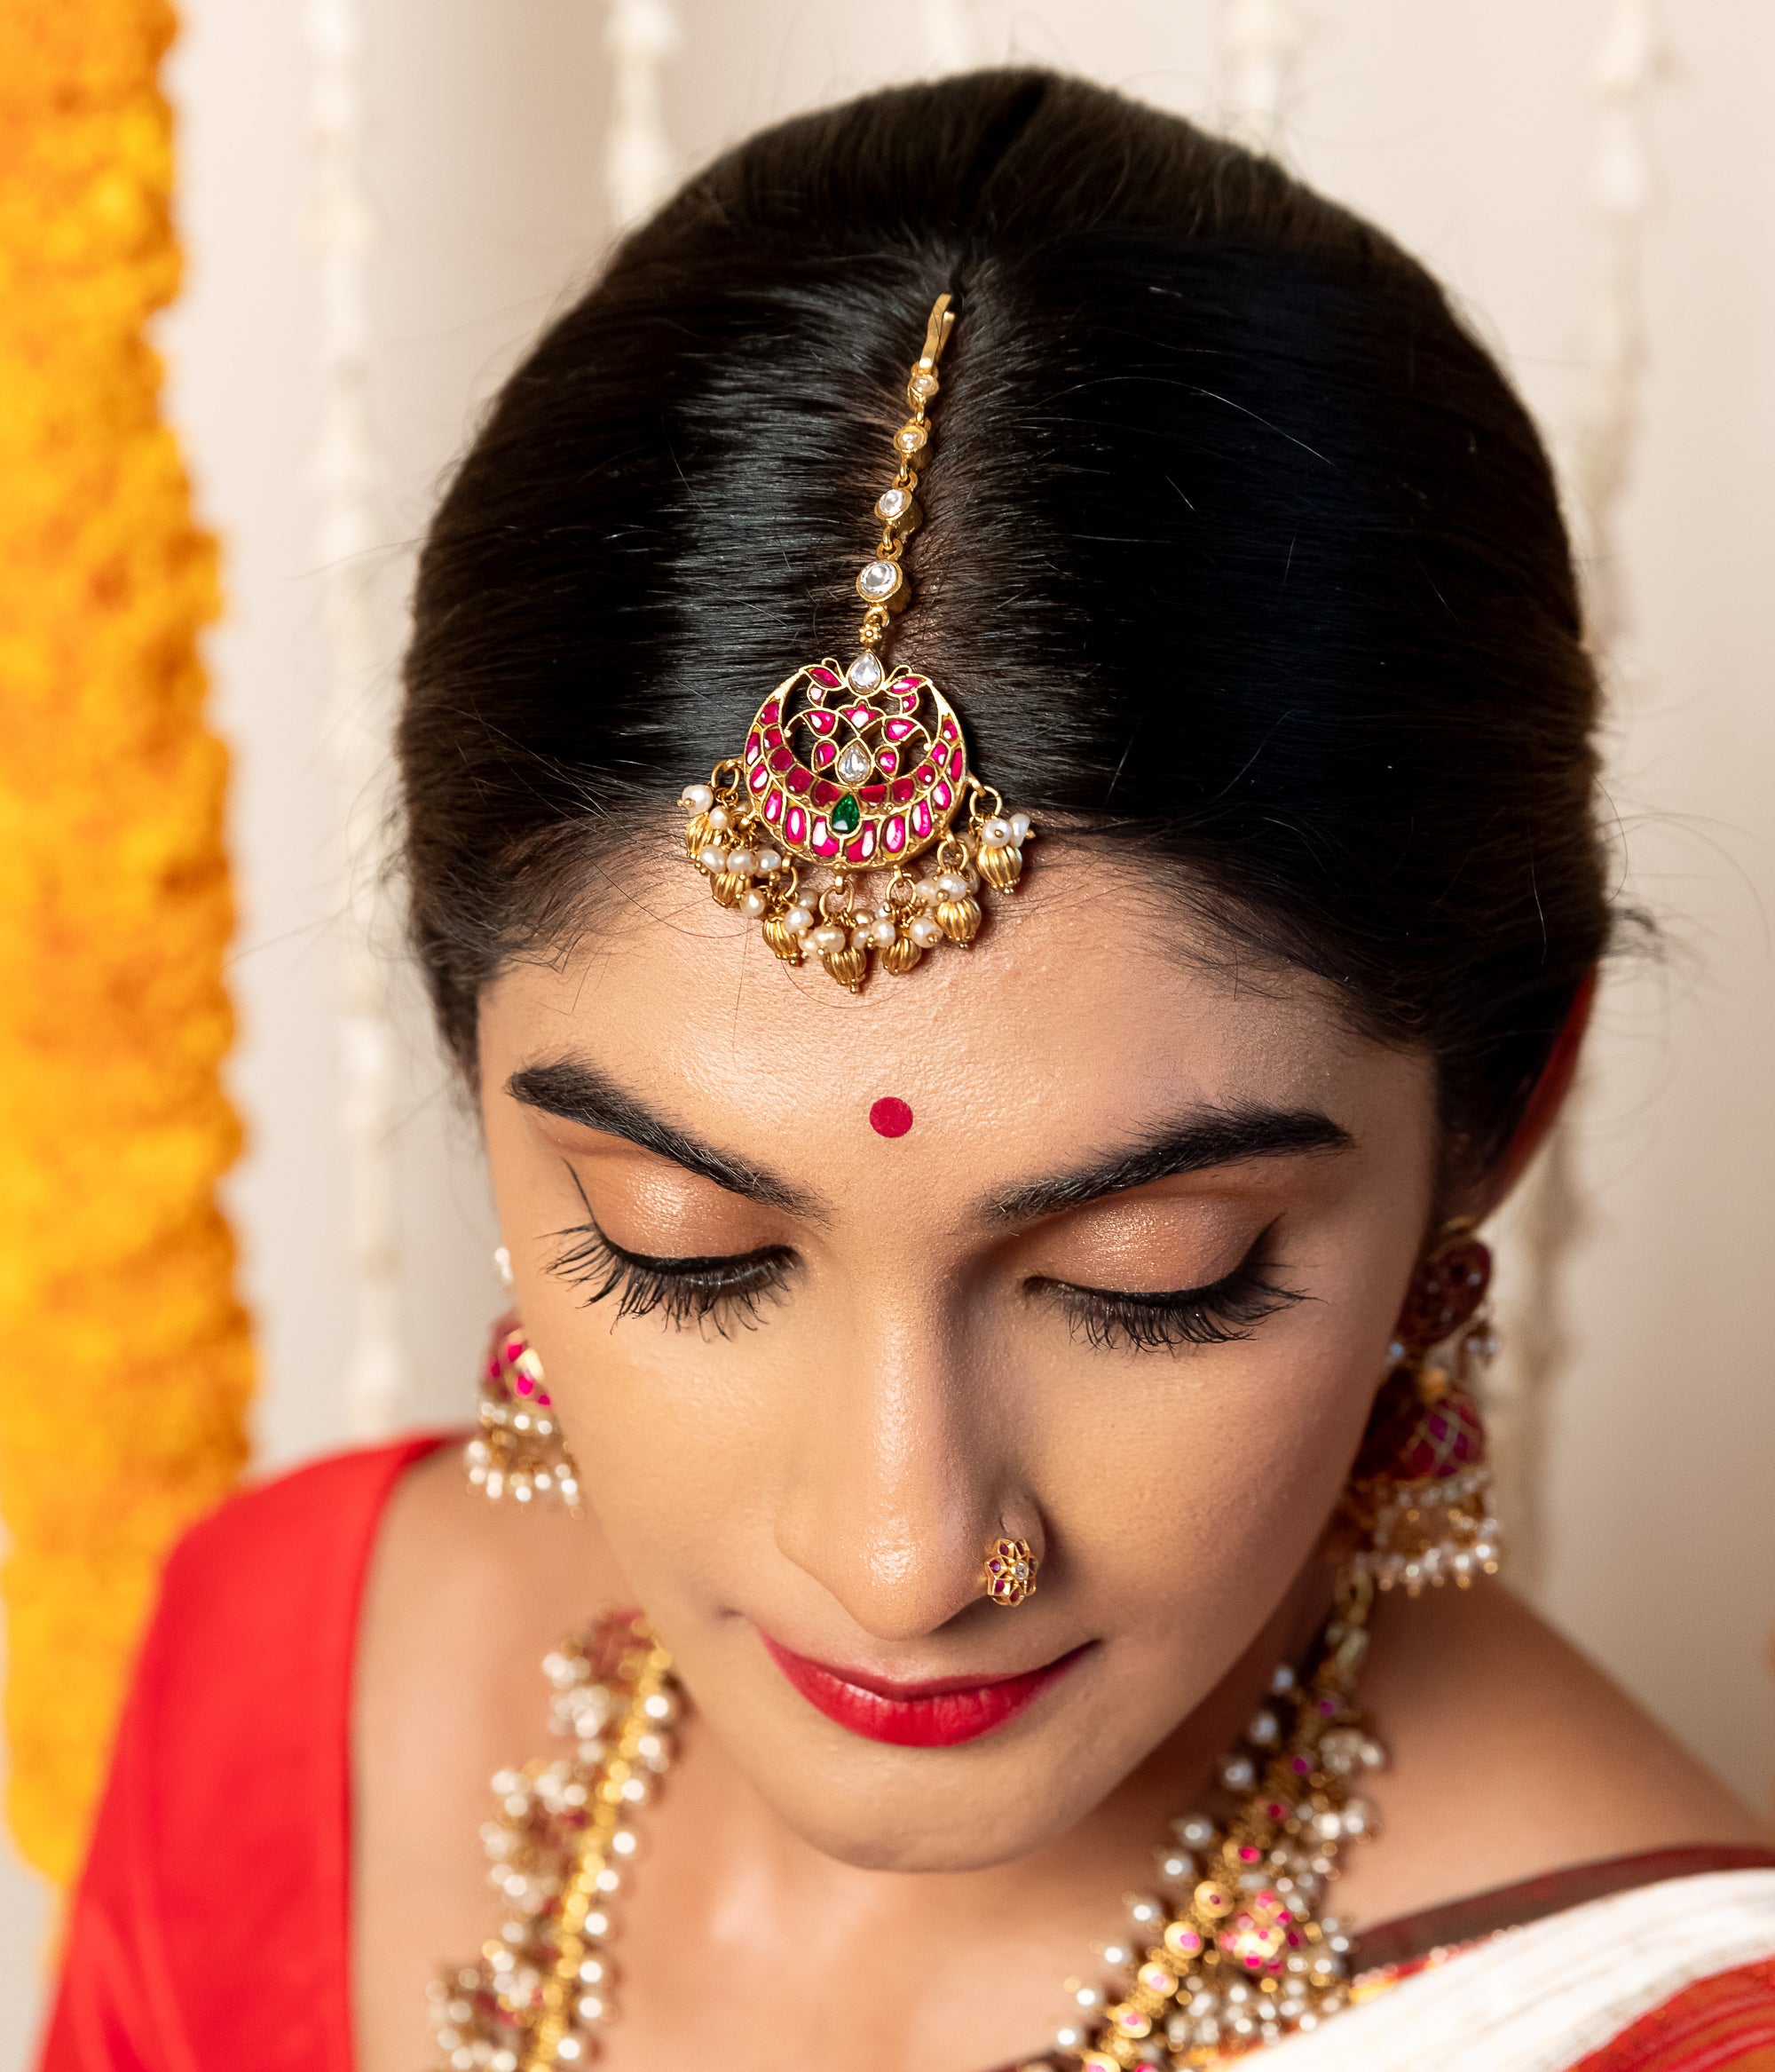 Hairstyles for Indian Wedding – 20 Showy Bridal Hairstyles